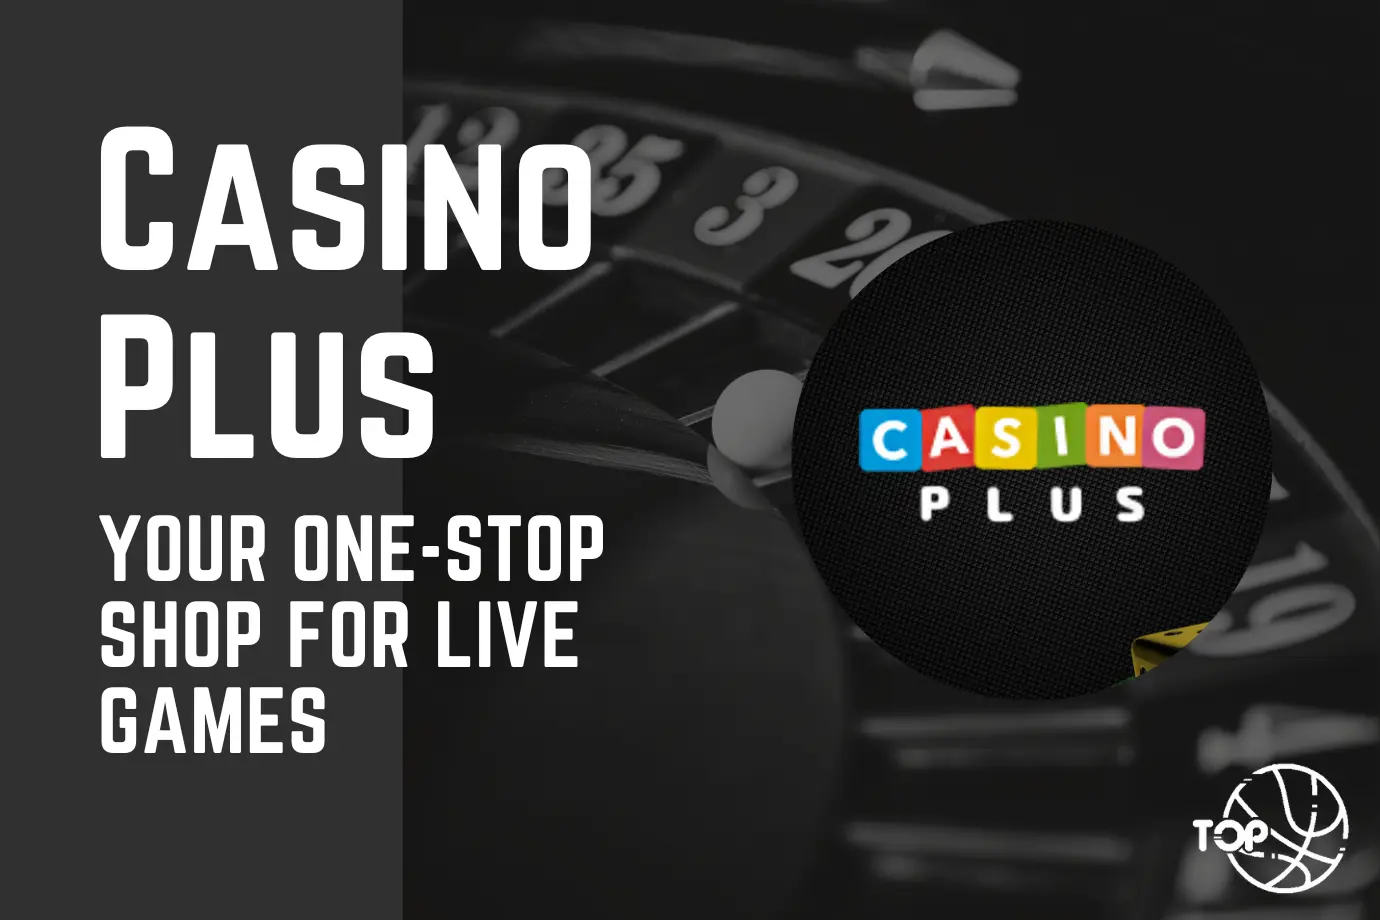 Casino Plus: Your One-Stop Shop for Live Games